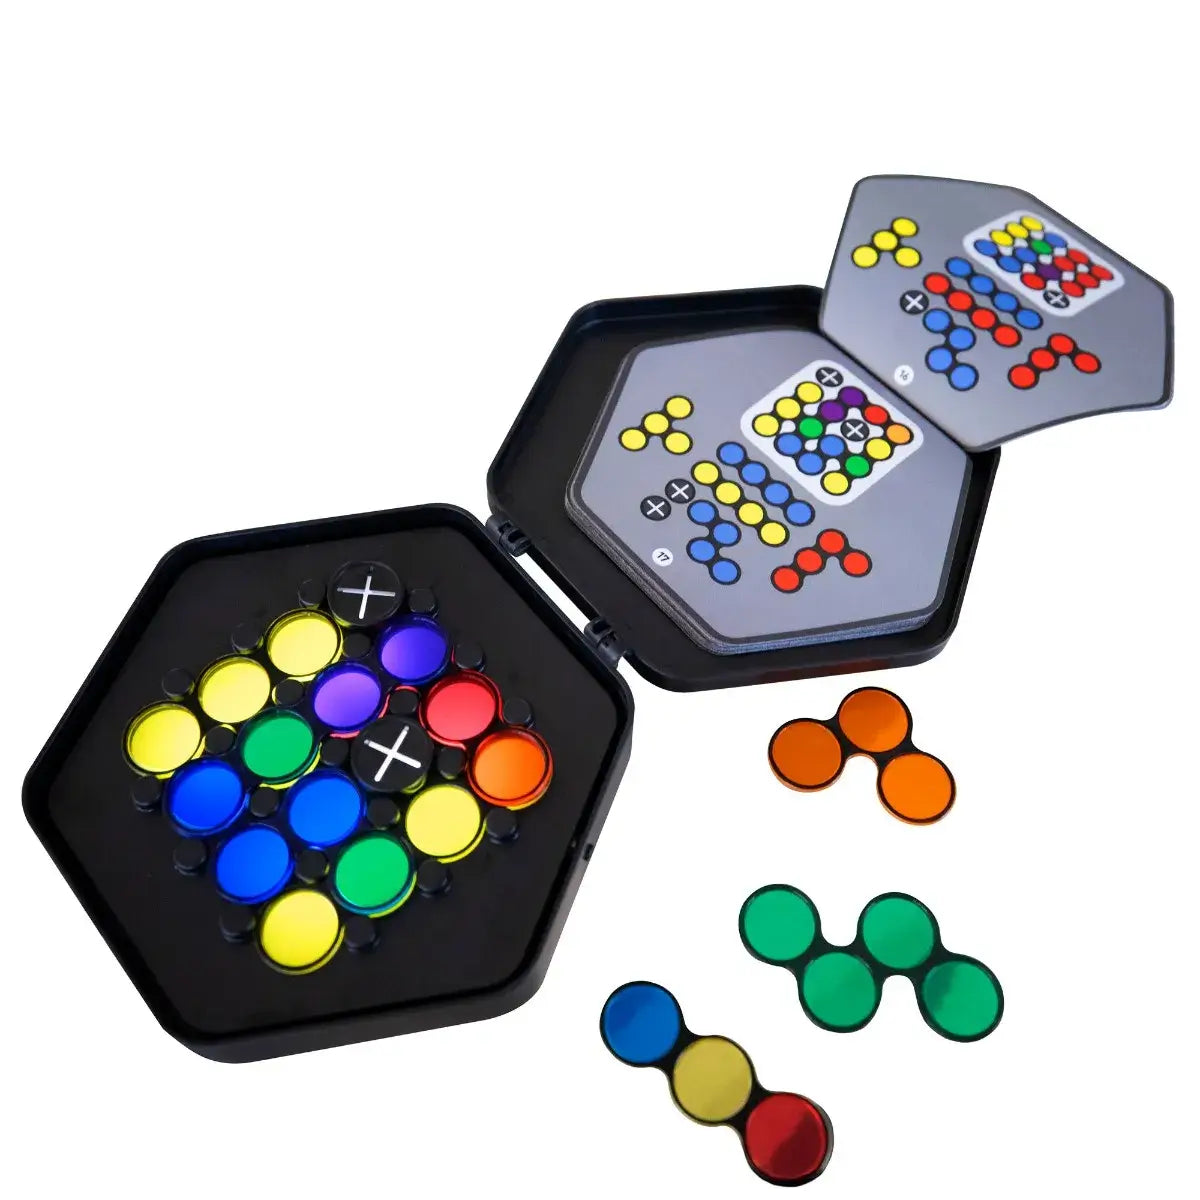 Kanoodle Fusion Light-Up Puzzle Game